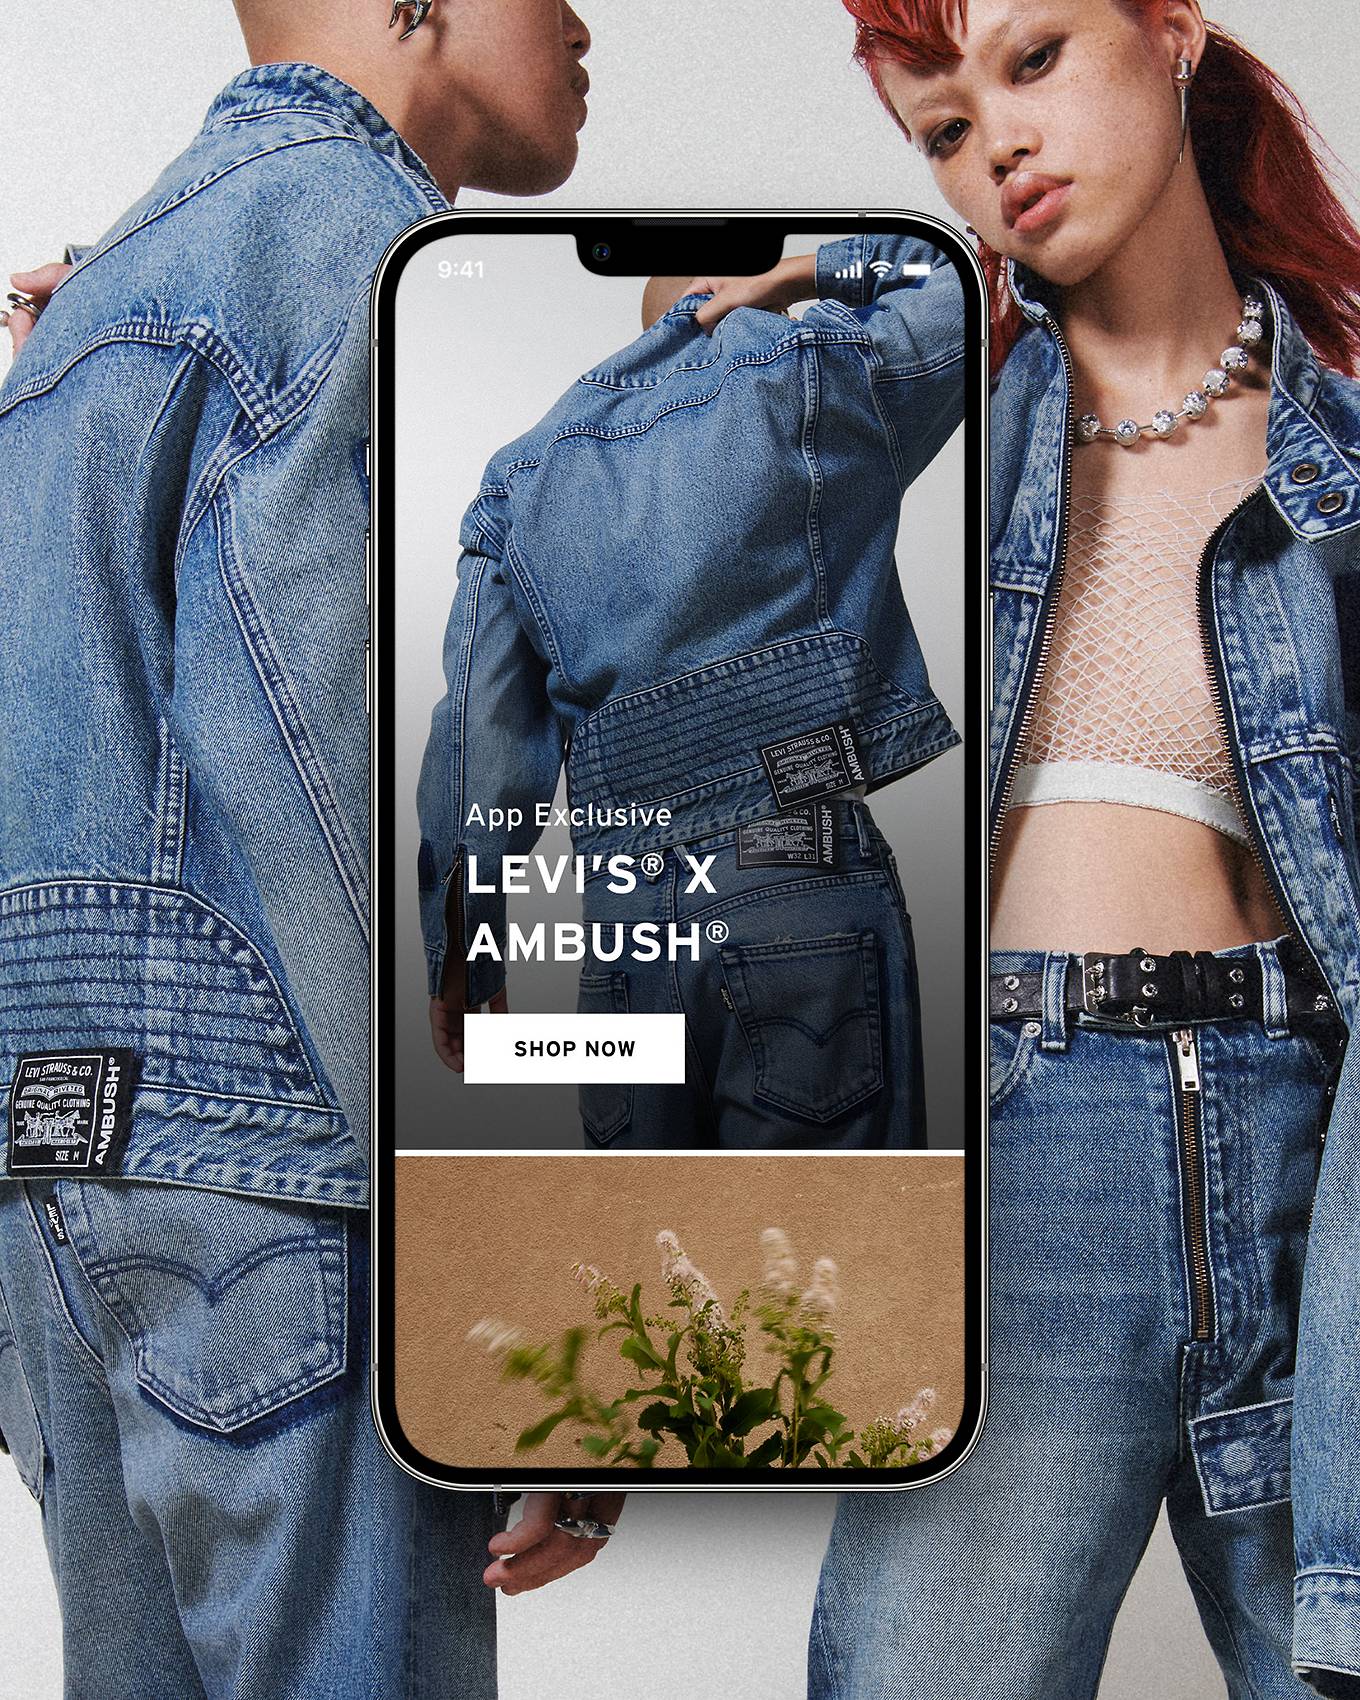 Exclusive Launches Imagery - Levi's® X AMBUSH creative imagery